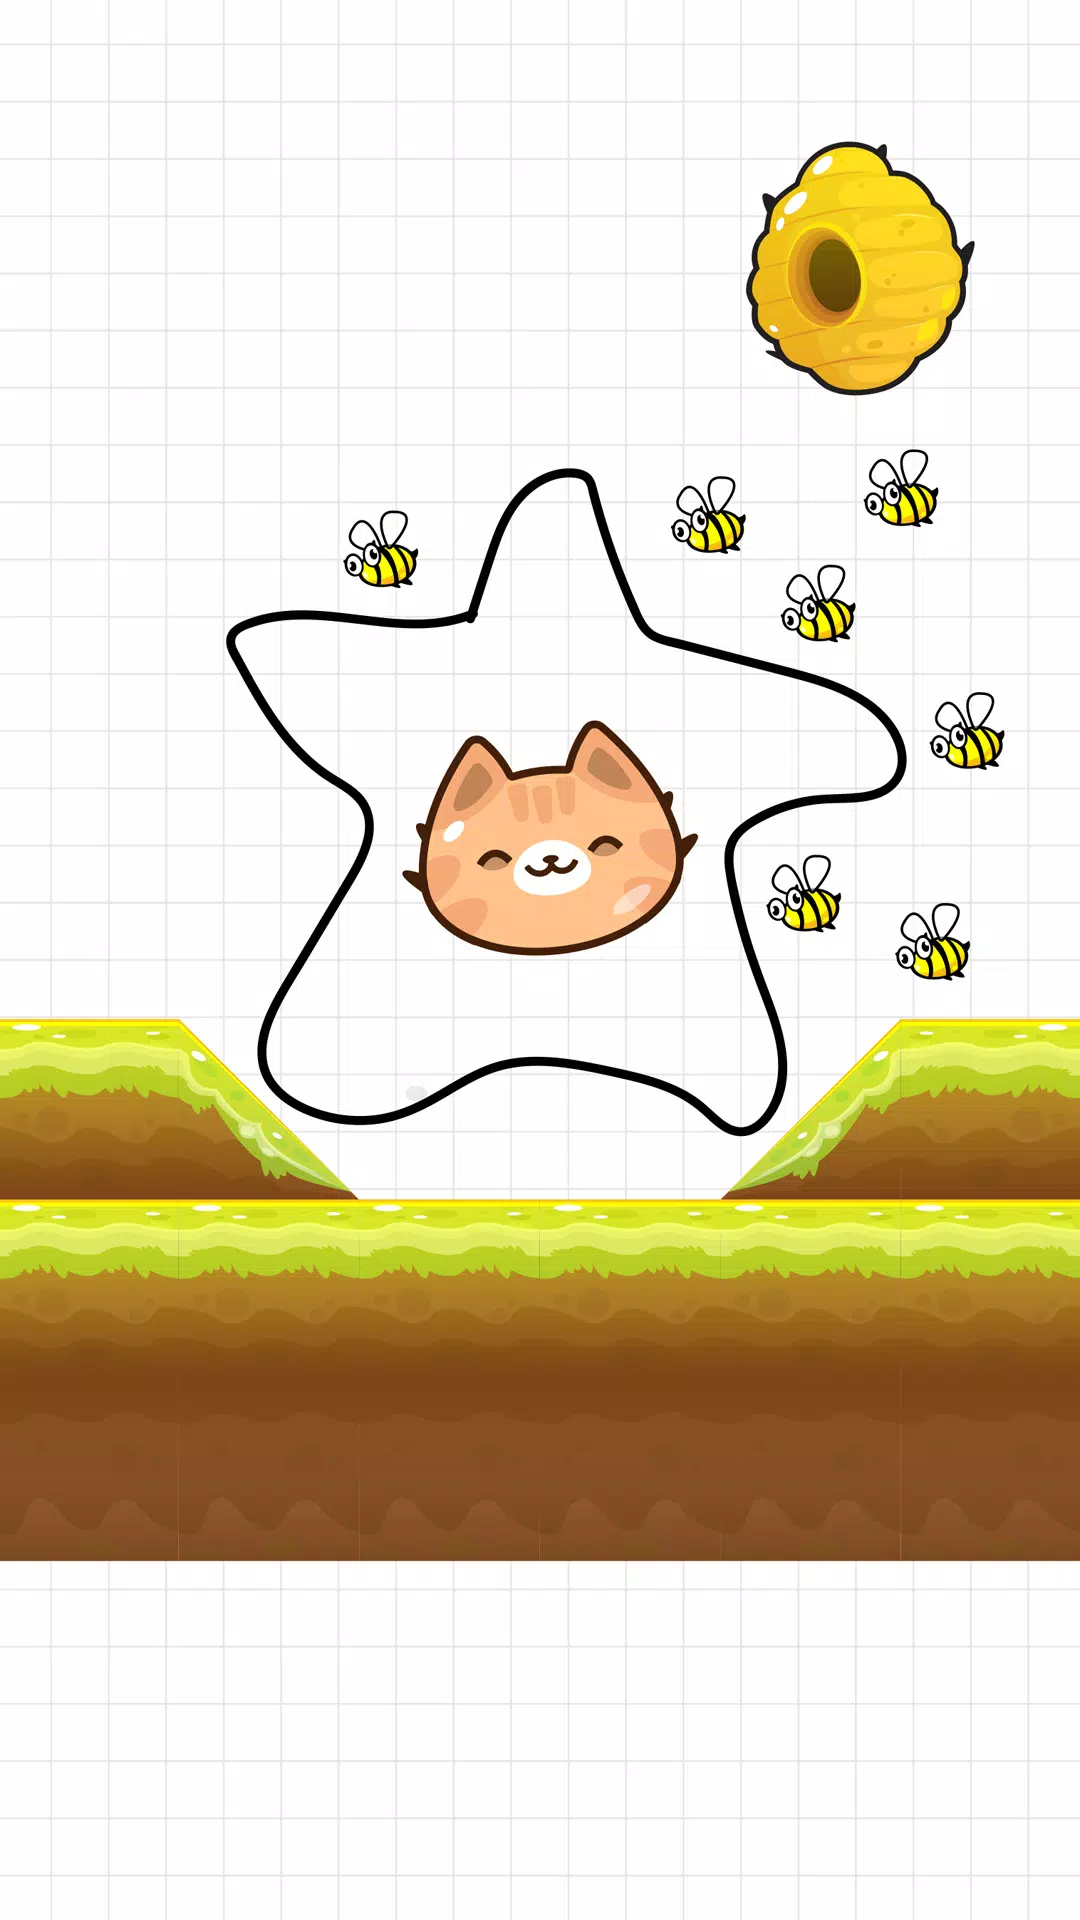 About: Save The Dogi 2 - Dog Bee Draw (Google Play version)